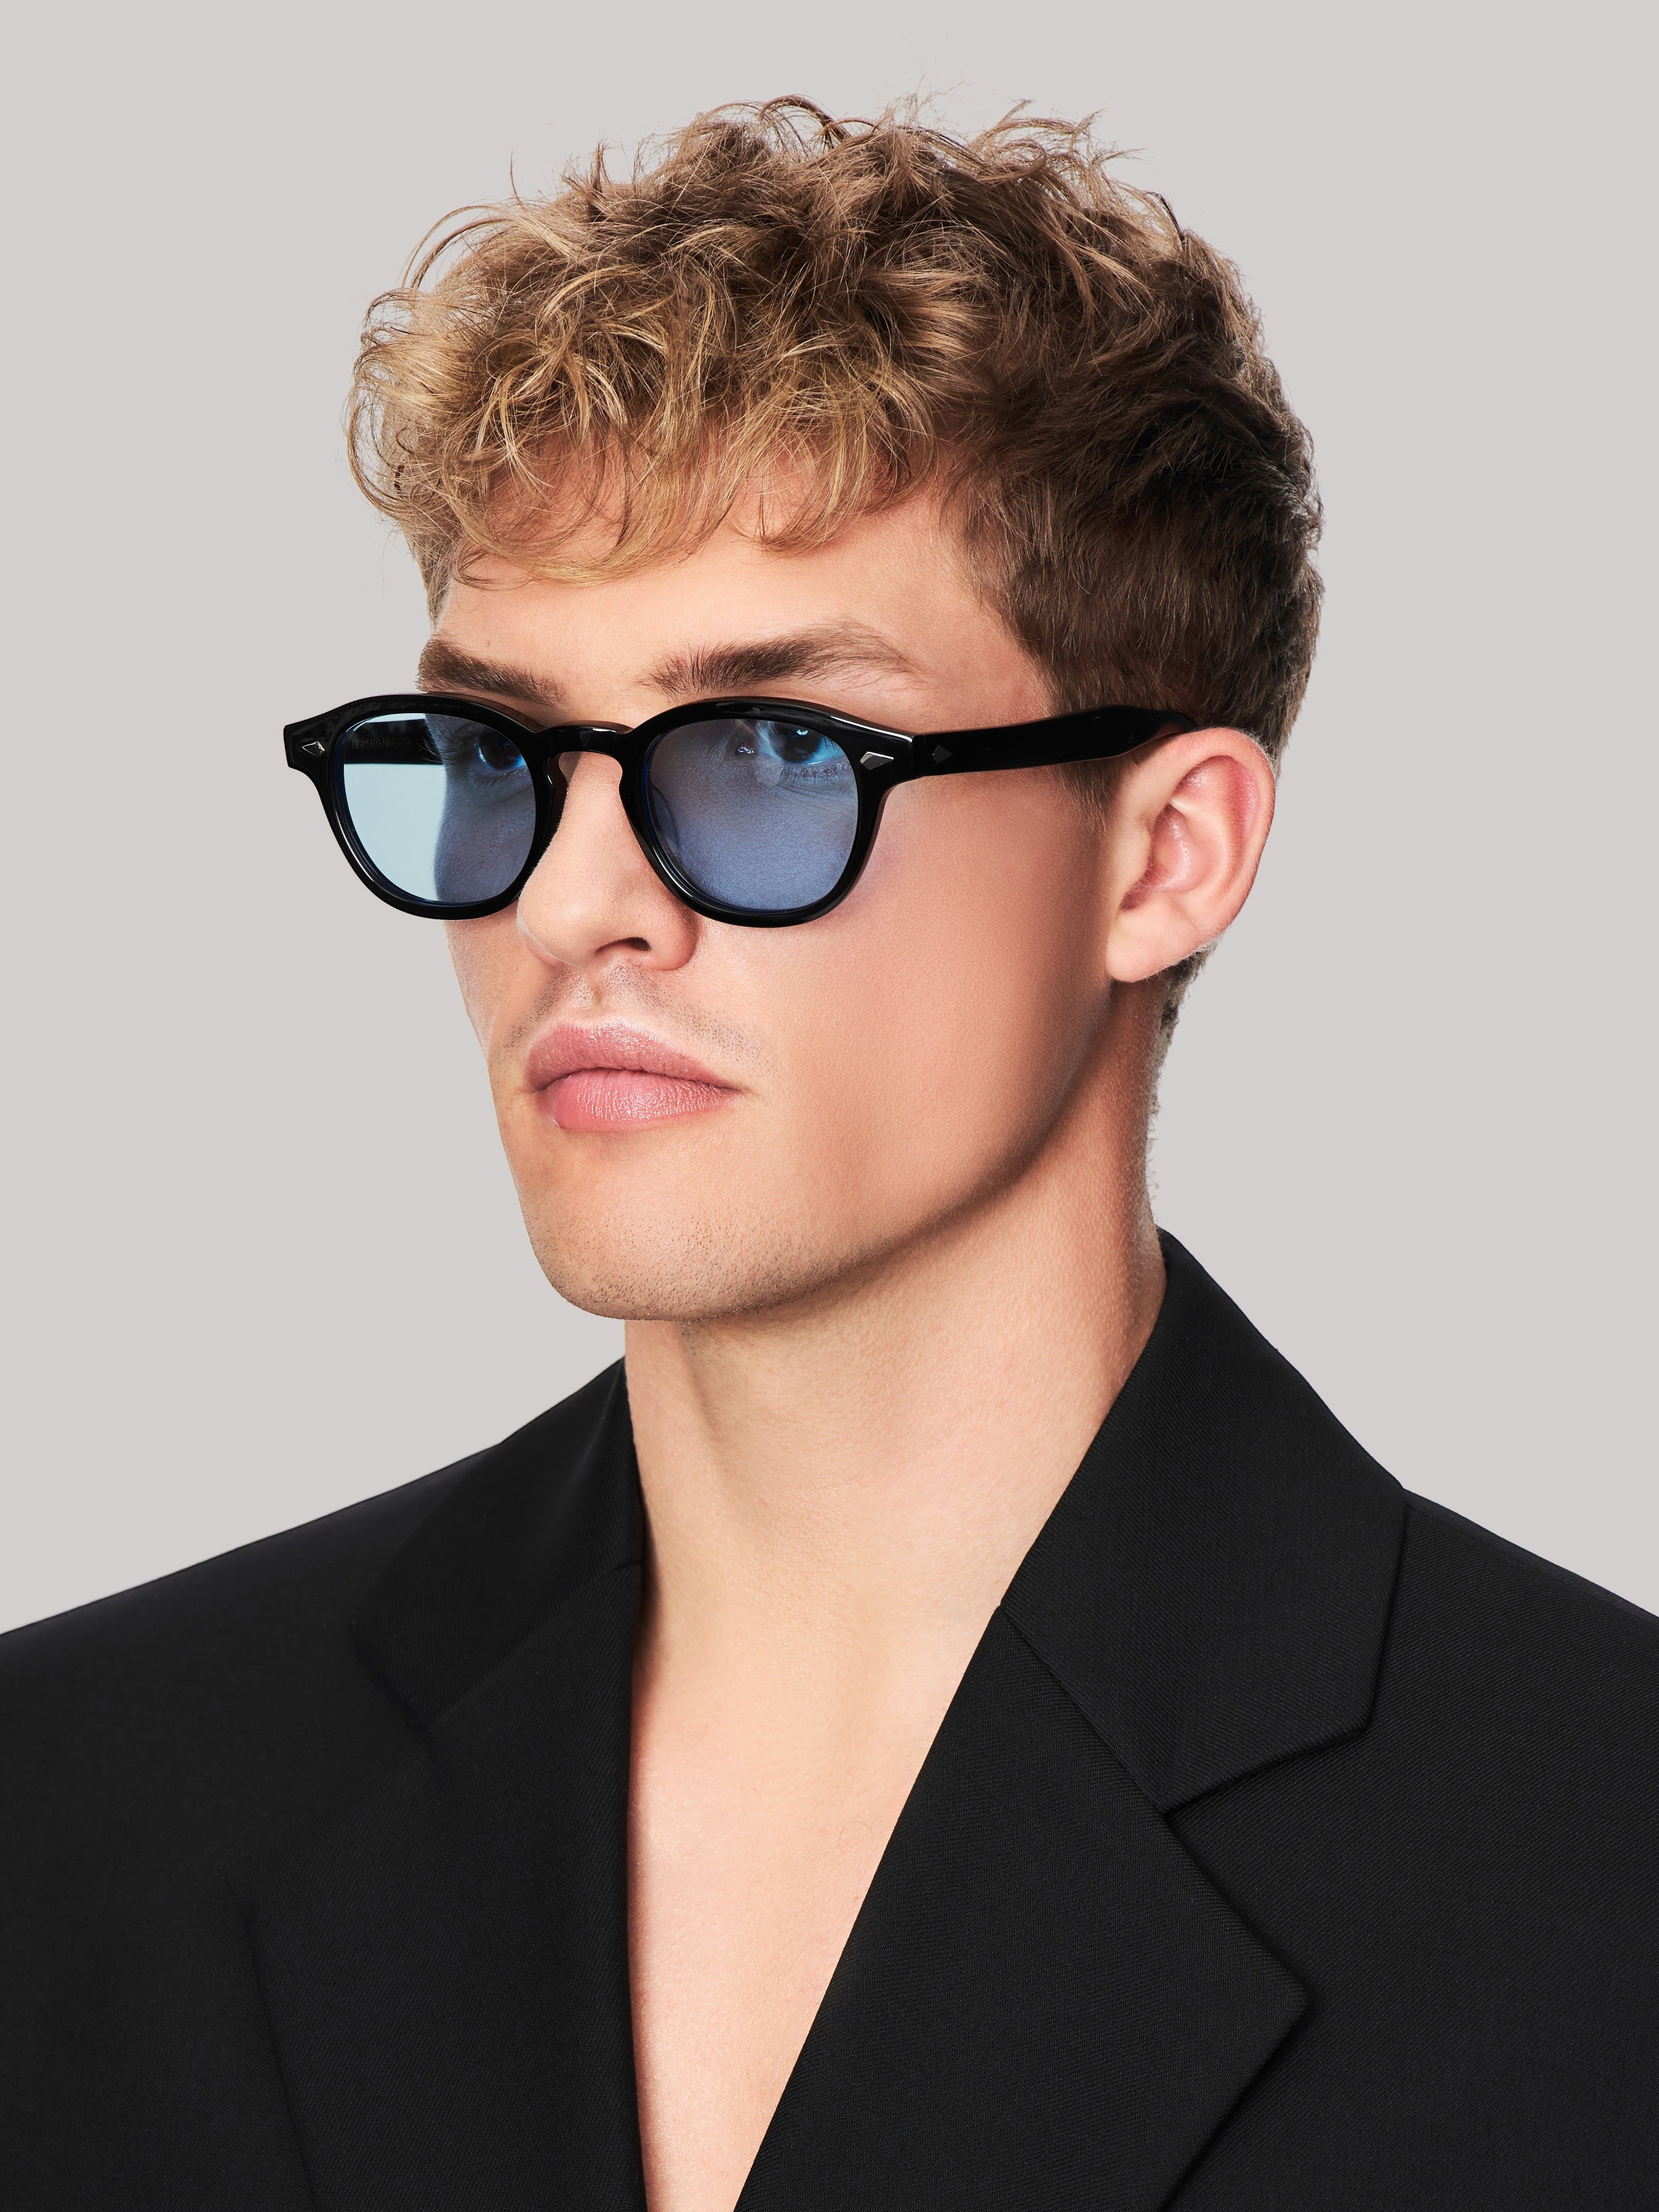 Explore Naruto Nagata online. Exclusive collections of Santa Monica sunglasses designs. The latest Naruto Nagata Santa Monica sunglasses designs, limited collections and accessories. Shop Now. Shop Best Sellers. Naruto Nagata Eyewear.